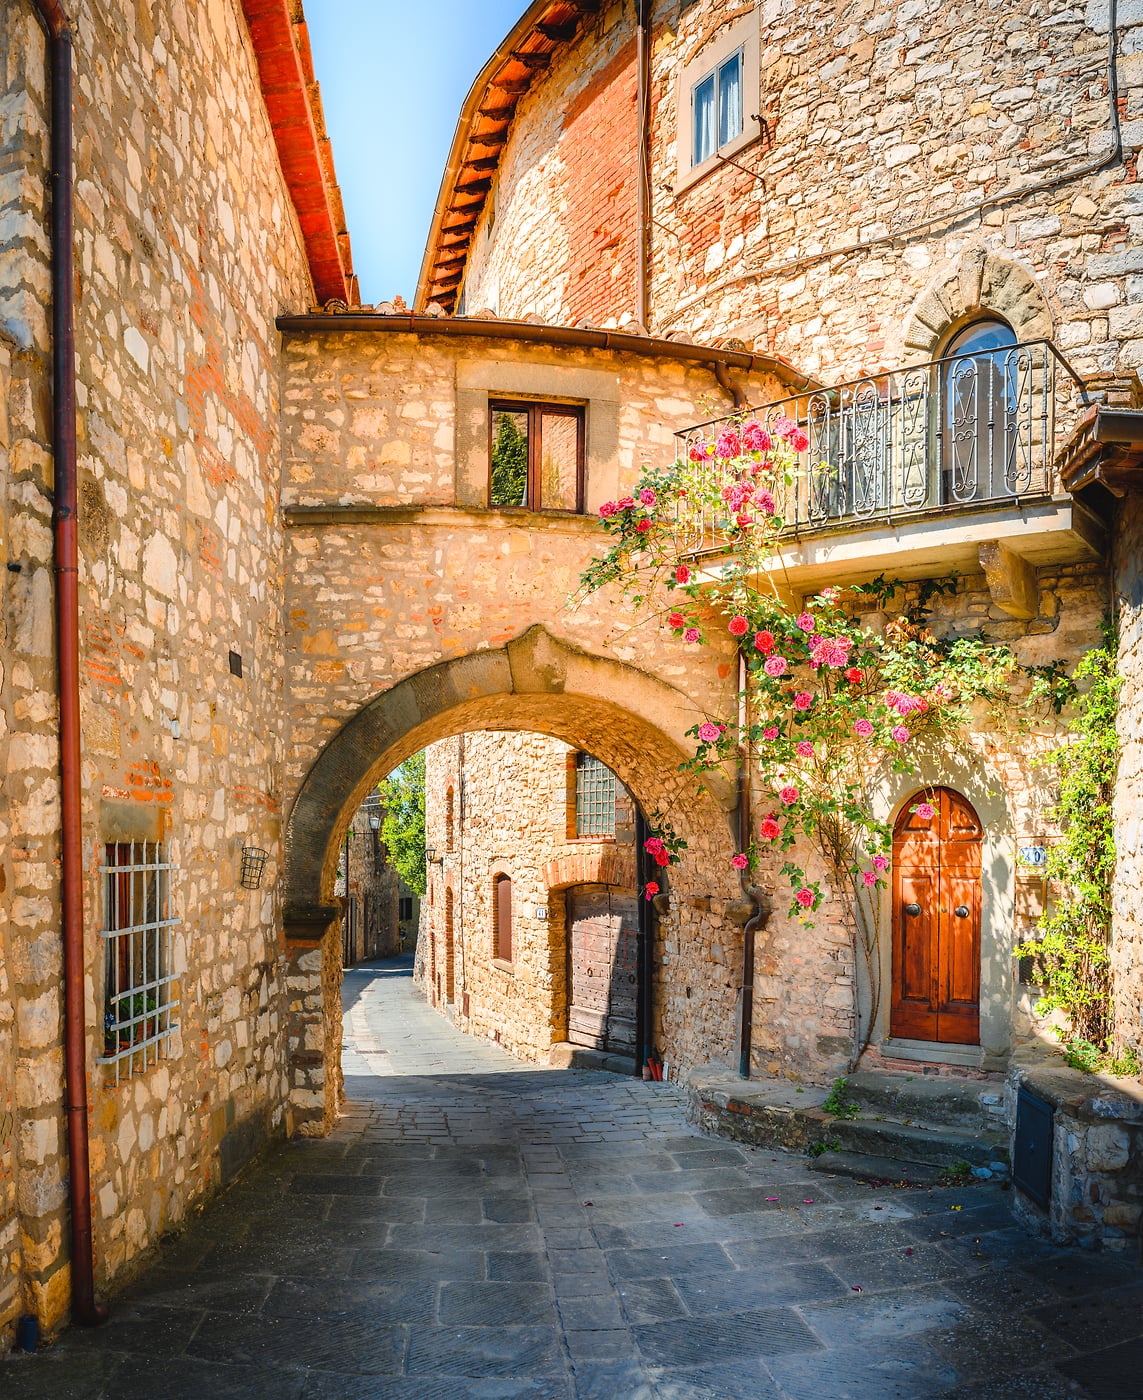 465 megapixels! A very high resolution, large-format VAST photo print of a town street in Italy; art photo created by Justin Katz in Vertine, Gaiole in Chianti, Tuscany, Italy.